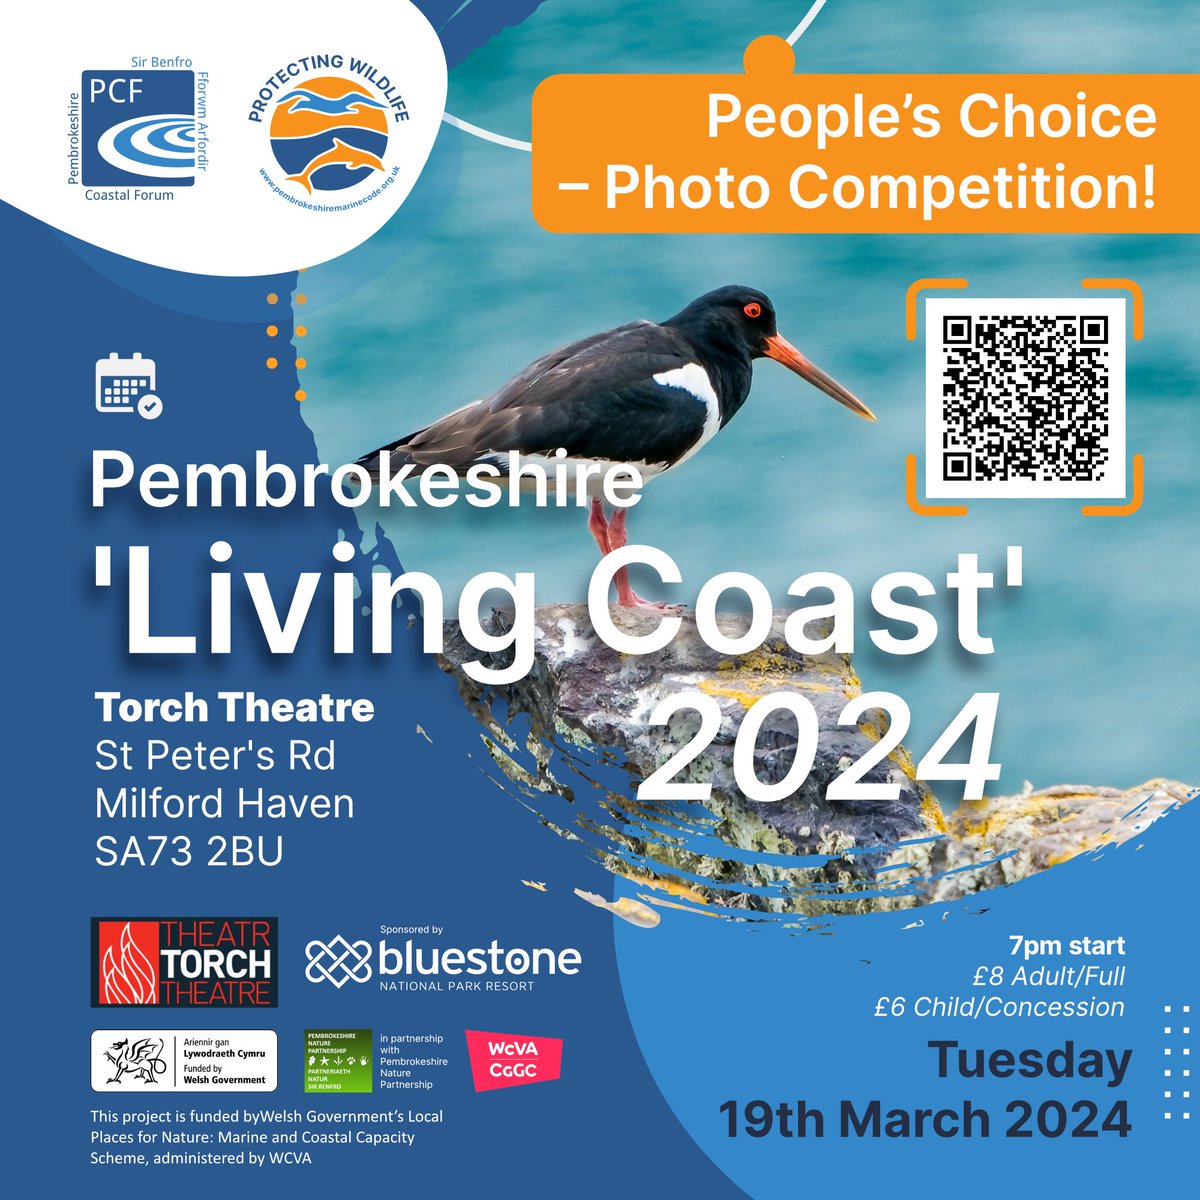 Voting is now open for the People’s Choice Award for our 2024 Photography Competition! Follow this link to see the entries and cast your vote: pembrokeshirecoastalforum.org.uk/news-events/pe… Voting closes Midnight Sunday 17th March